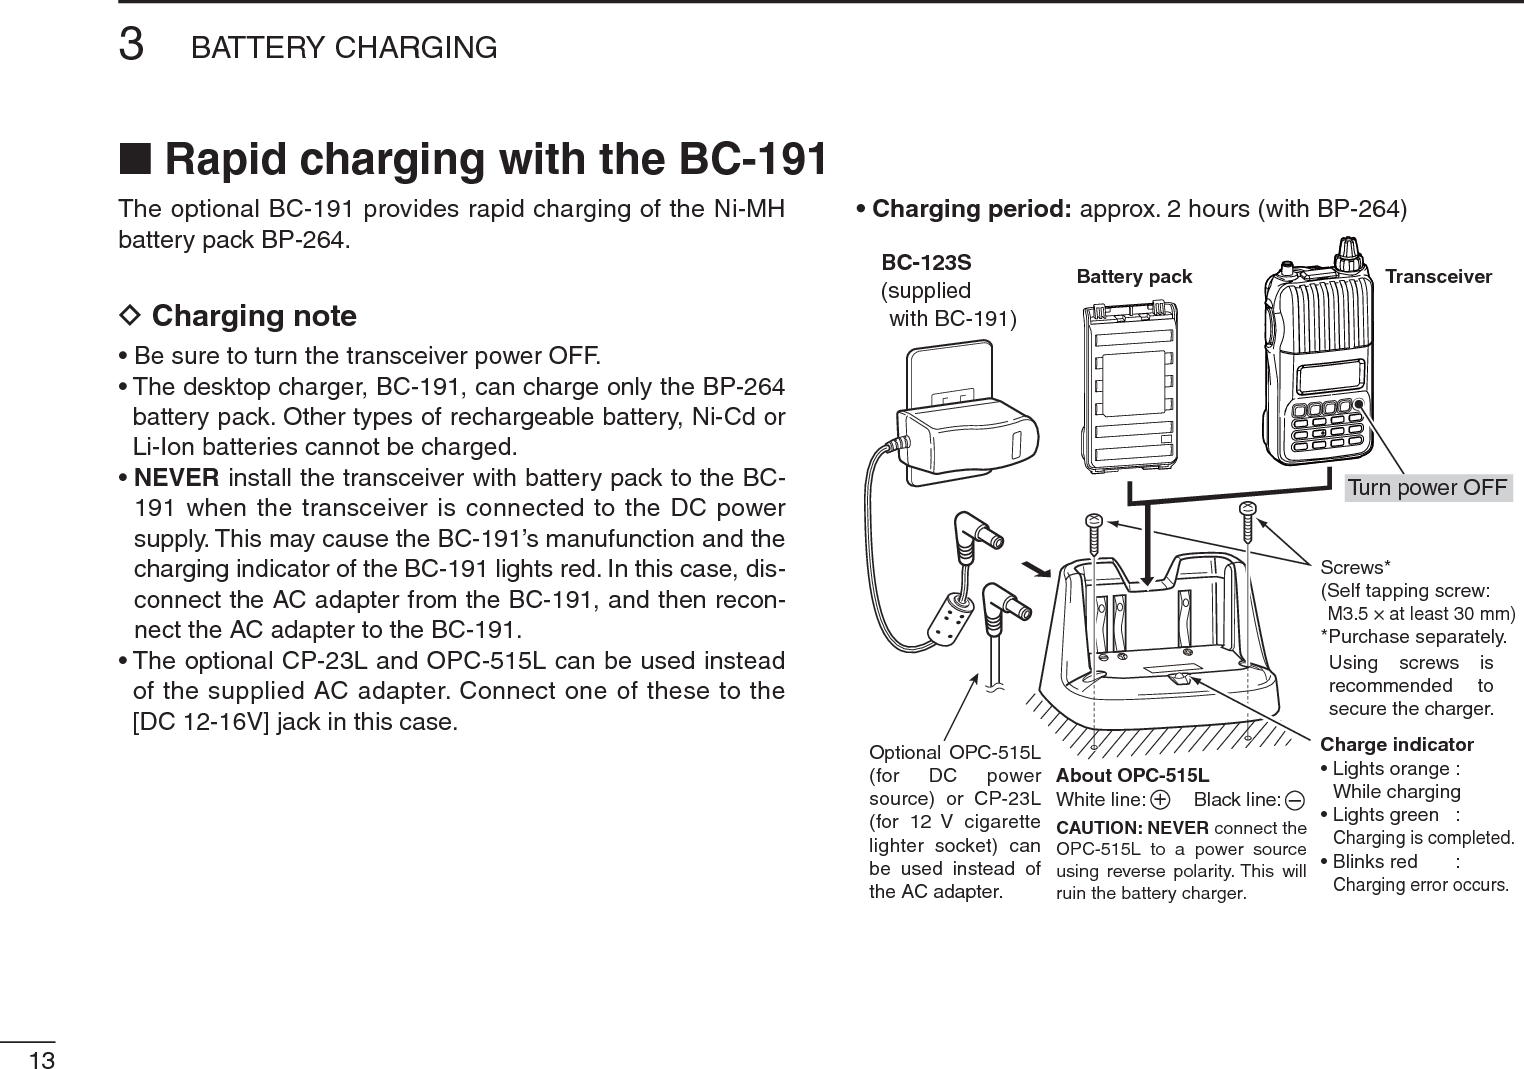 133BATTERY CHARGINGThe optional BC-191 provides rapid charging of the Ni-MH battery pack BP-264.DCharging note• Be sure to turn the transceiver power OFF.• The desktop charger, BC-191, can charge only the BP-264 battery pack. Other types of rechargeable battery, Ni-Cd or Li-Ion batteries cannot be charged.•NEVER install the transceiver with battery pack to the BC-191 when the transceiver is connected to the DC power supply. This may cause the BC-191’s manufunction and the charging indicator of the BC-191 lights red. In this case, dis-connect the AC adapter from the BC-191, and then recon-nect the AC adapter to the BC-191.• The optional CP-23L and OPC-515L can be used instead of the supplied AC adapter. Connect one of these to the [DC 12-16V] jack in this case.• Charging period: approx. 2 hours (with BP-264)TransceiverBattery packCharge indicator• Lights orange : While charging• Lights green : Charging is completed.• Blinks red : Charging error occurs.Screws*(Self tapping screw:M3.5 × at least 30 mm)*Purchase separately.Using screws isrecommended tosecure the charger.About OPC-515LWhite line:         Black line:CAUTION: NEVER connect the OPC-515L to a power sourceusing reverse polarity. This willruin the battery charger.+–Optional OPC-515L(for DC powersource) or CP-23L(for 12 V cigarettelighter socket) canbe used instead ofthe AC adapter.BC-123S(suppliedwith BC-191)Turn power OFFN Rapid charging with the BC-191